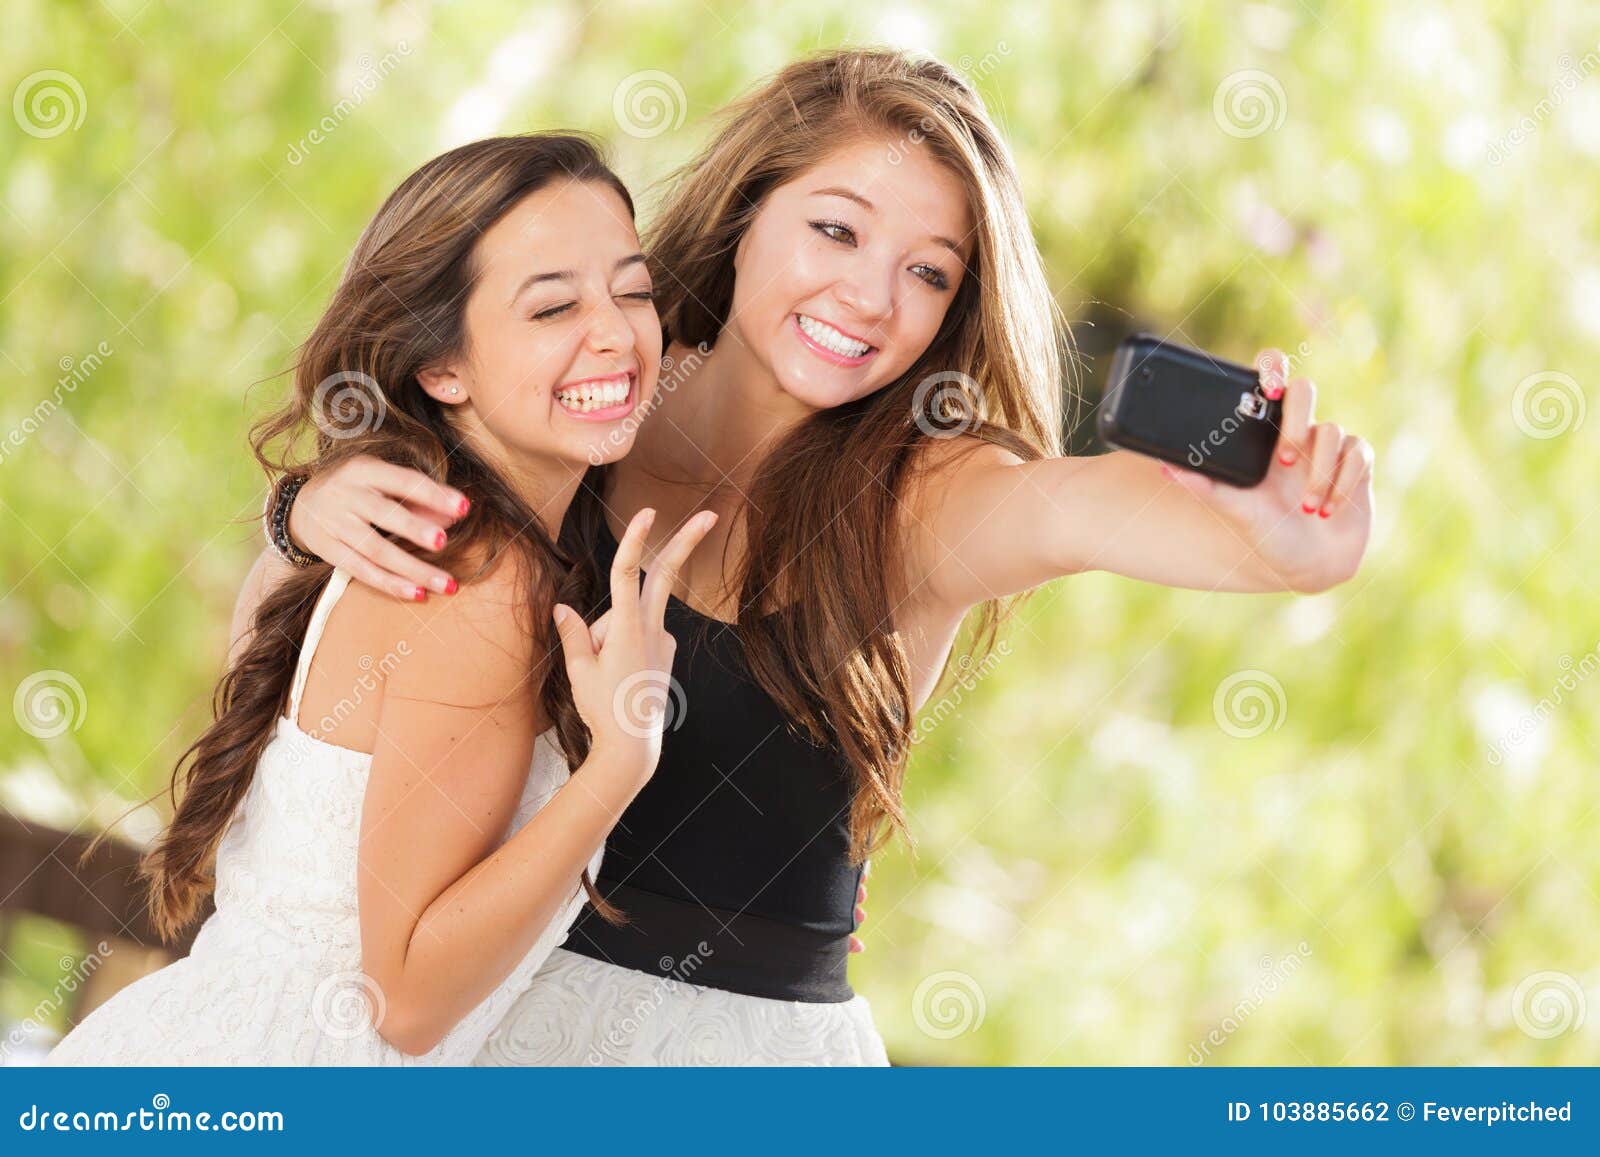 Teenagers with Computer. Two young and attractive 